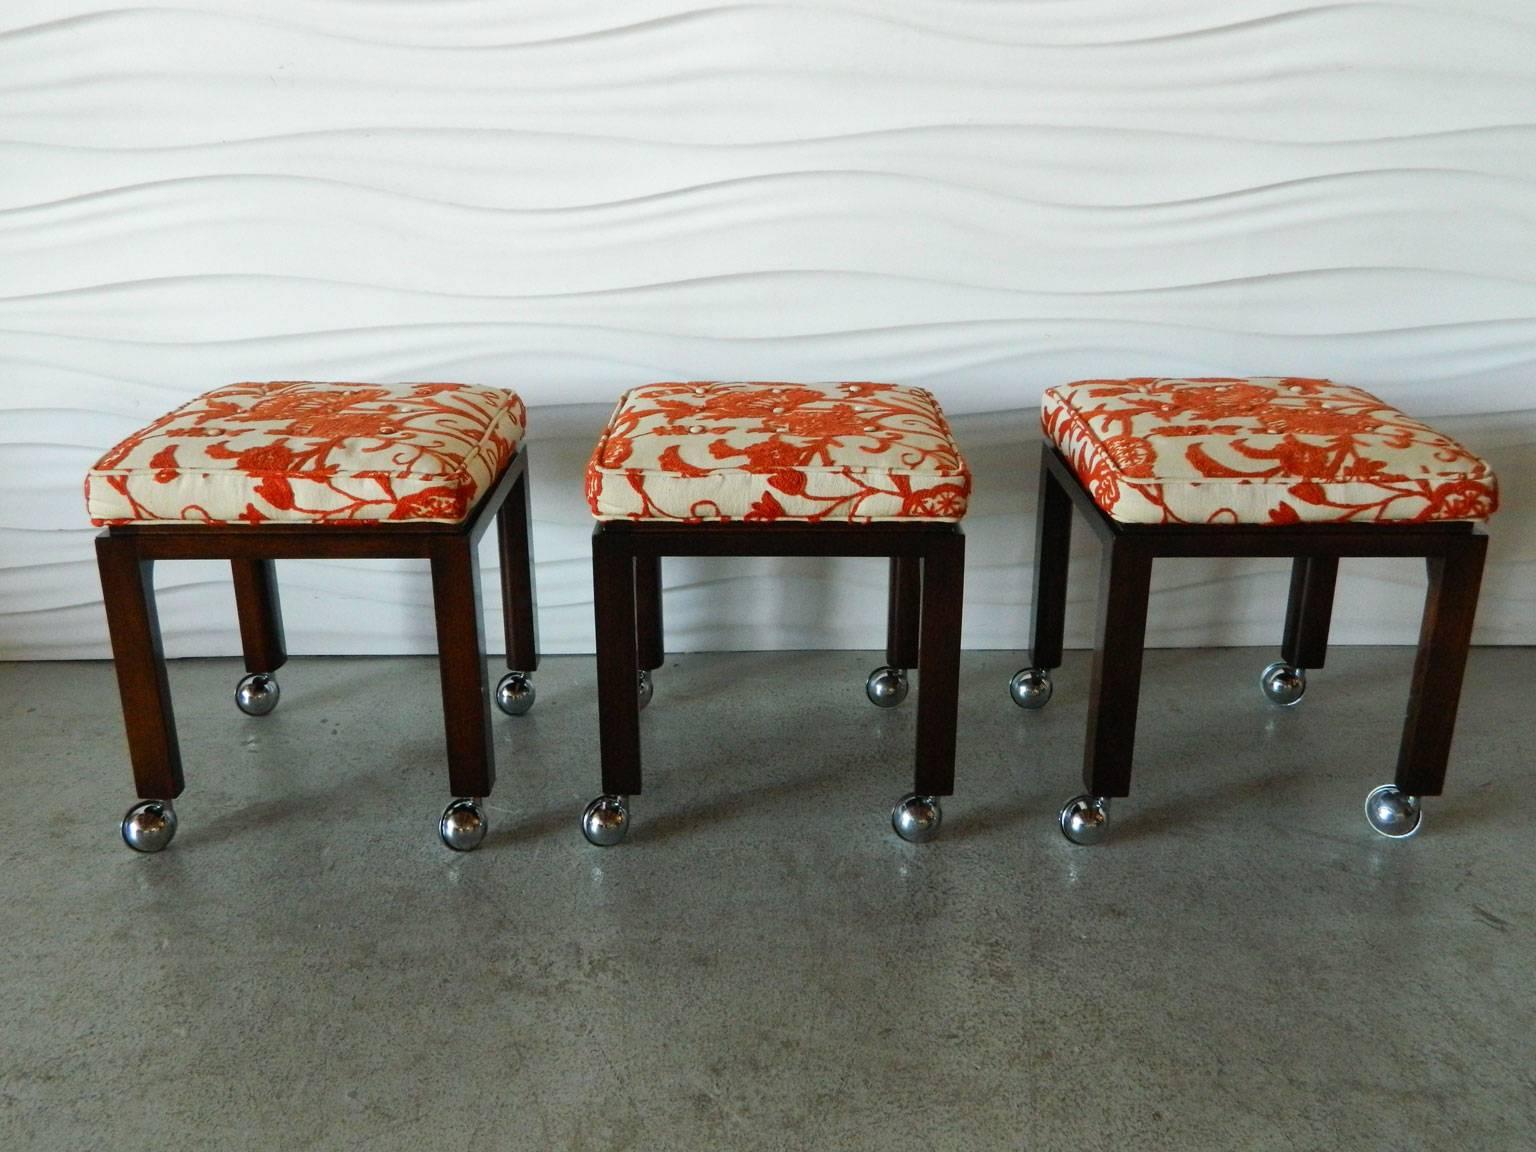 Classic 1960s Harvey Probber stools with original finish, upholstered crewel work seats, and casters.